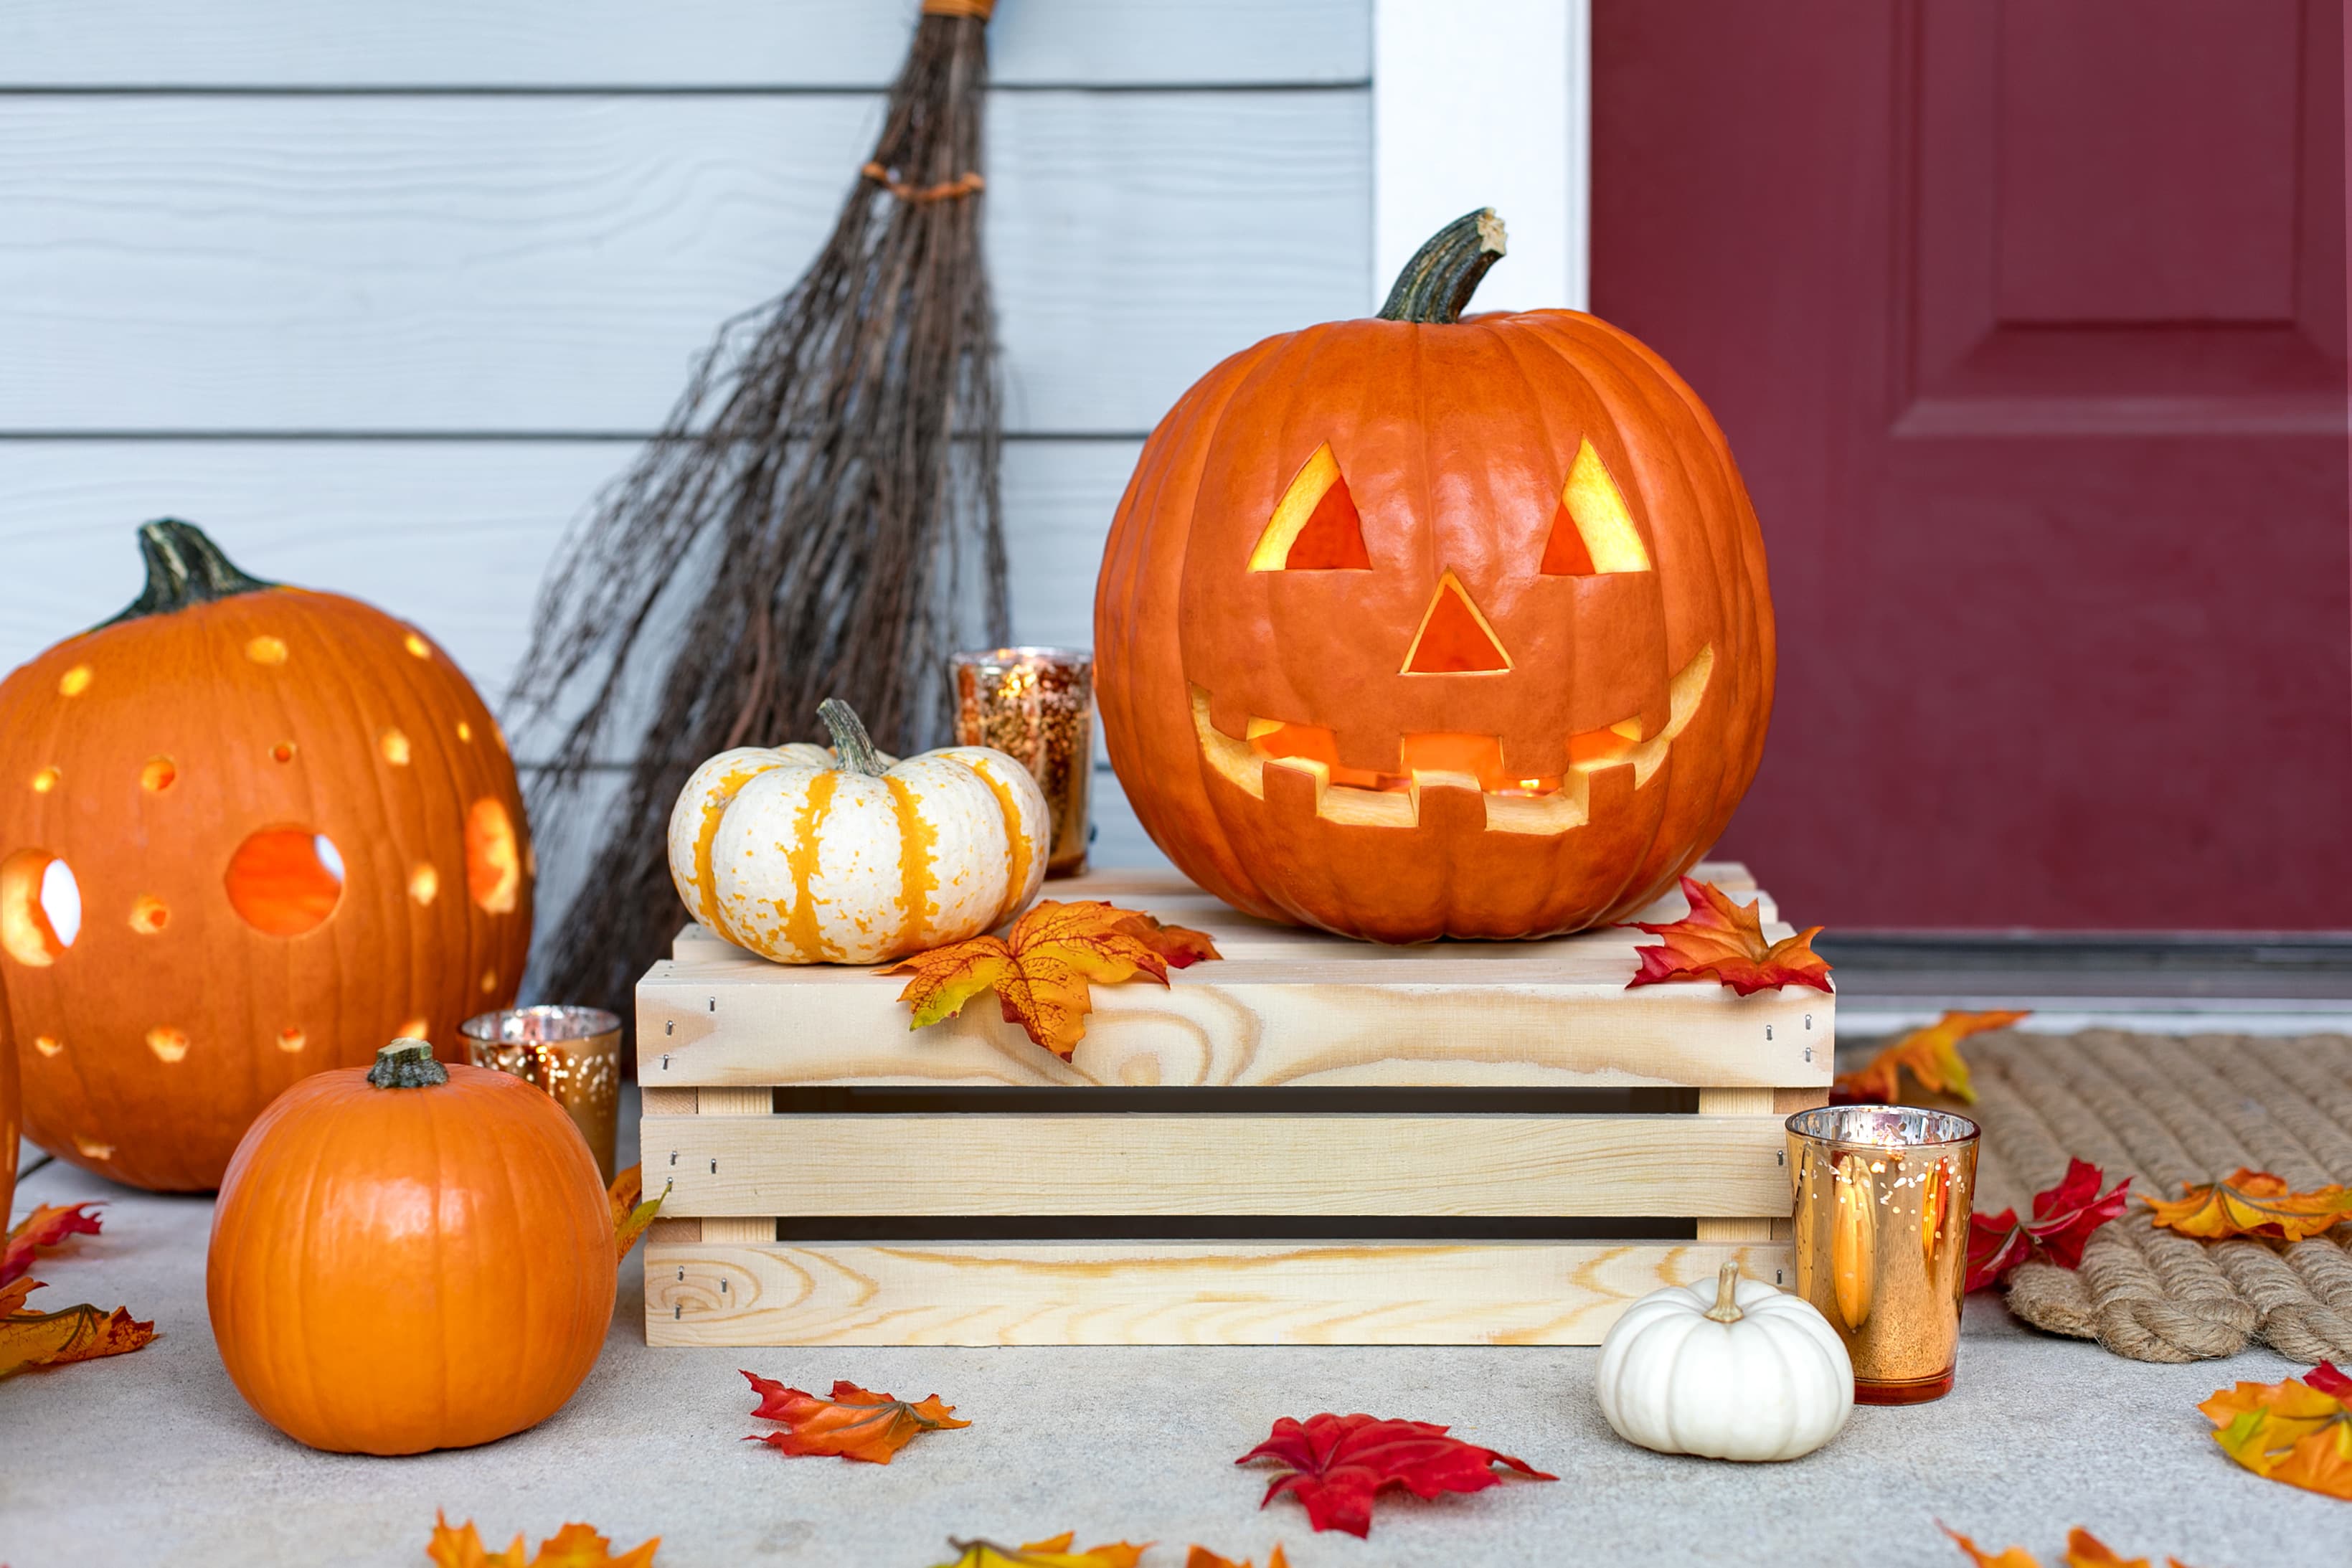 How To Carve a Pumpkin for Halloween (The Easiest Way!) | The Kitchn